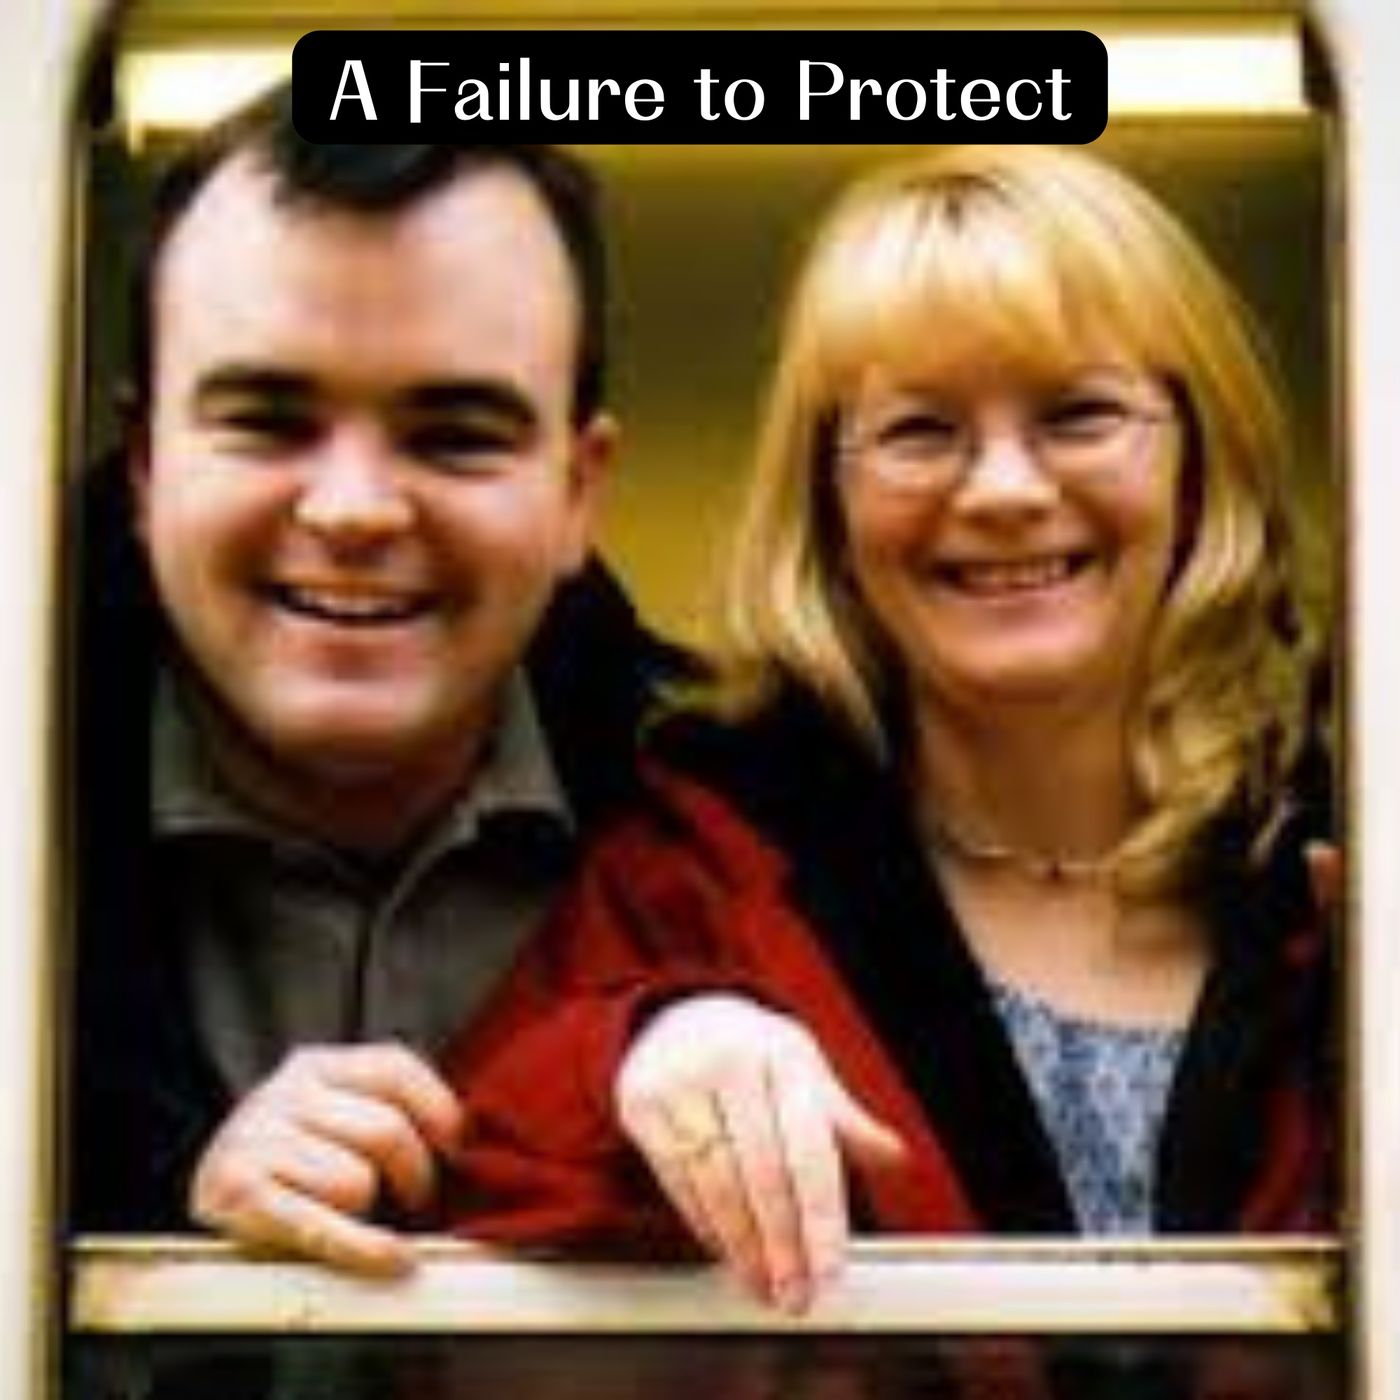 A Failure to Protect: The Story of Andrew Bagby & Zachary Turner